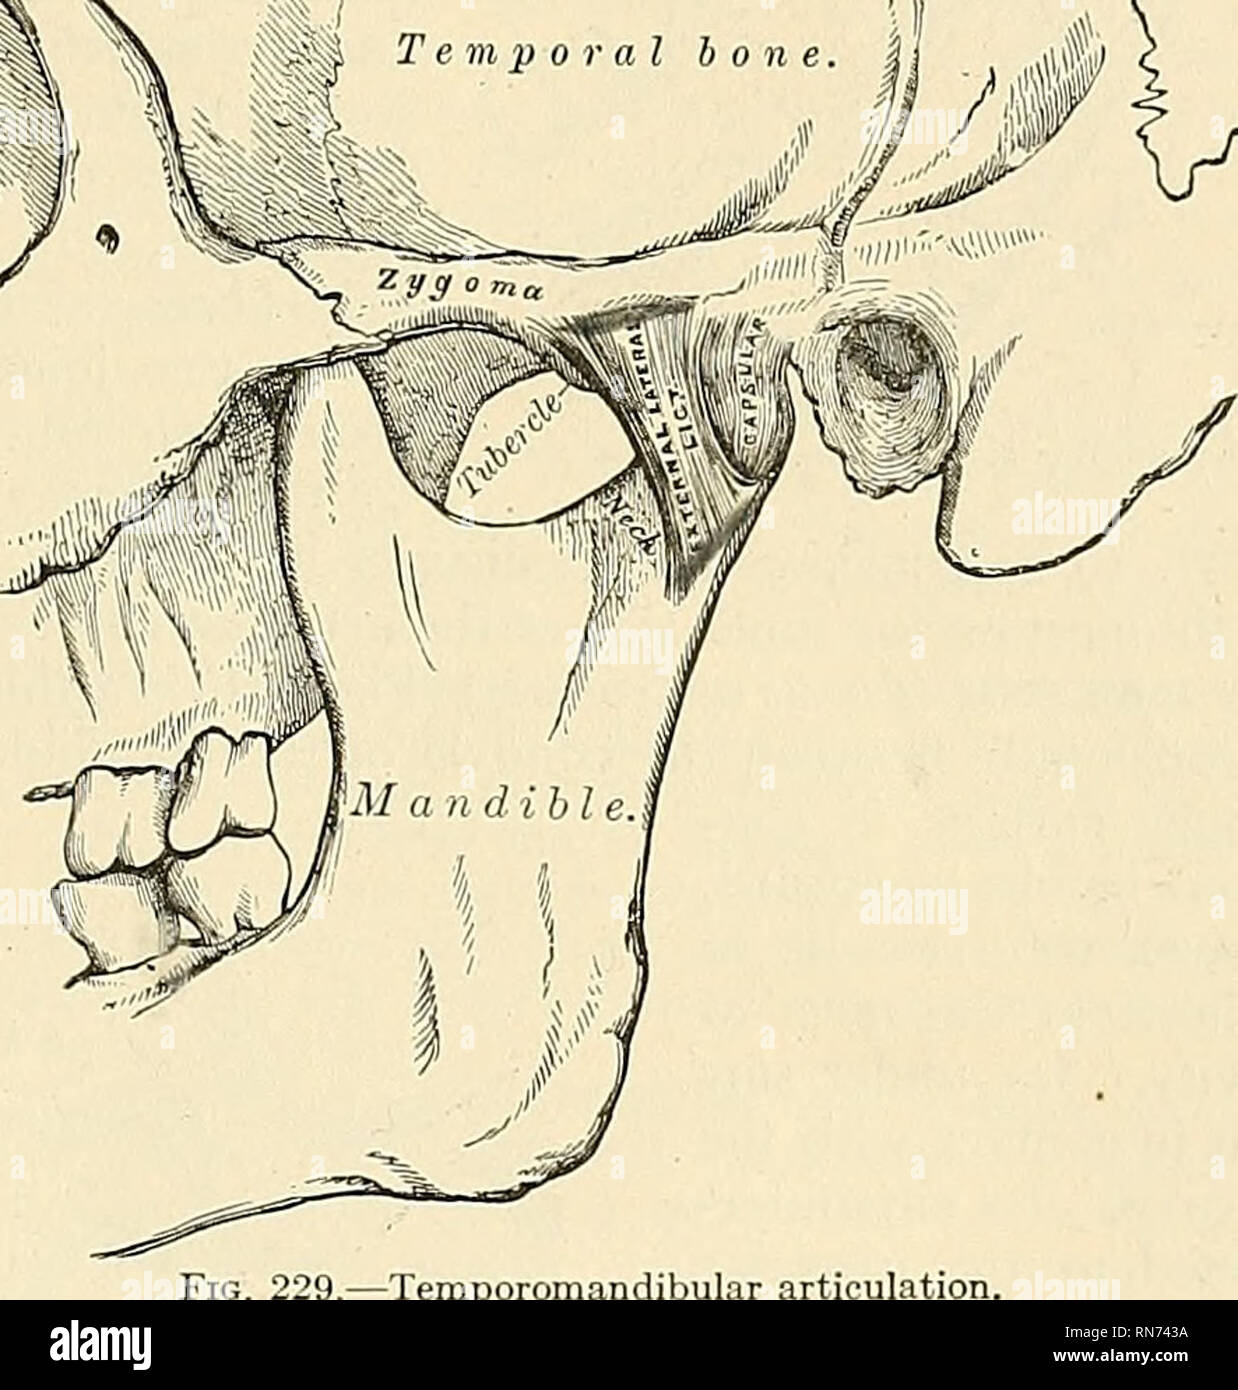 . Anatomy, descriptive and applied. Anatomy. TEMPOBOMANDIBULAR ARTICULATION 279 V. Temporomandibular Articiilation (Articulatio Mandibularis). This is a ginglymo-arthrodial joint; the parts entering into its formation on each side are, above, the anterior part of the glenoid cavity of the temporal bone and the eminentia articularis; and, below, the condyle of the mandible. The ligaments are the following: External Lateral. Internal Lateral. Articular Disk Stylomandibular. Capsular. The external lateral ligament {ligamenium temporomaitdibulare) (Fig. 229) is a short, thin, and narrow fasciculus Stock Photo